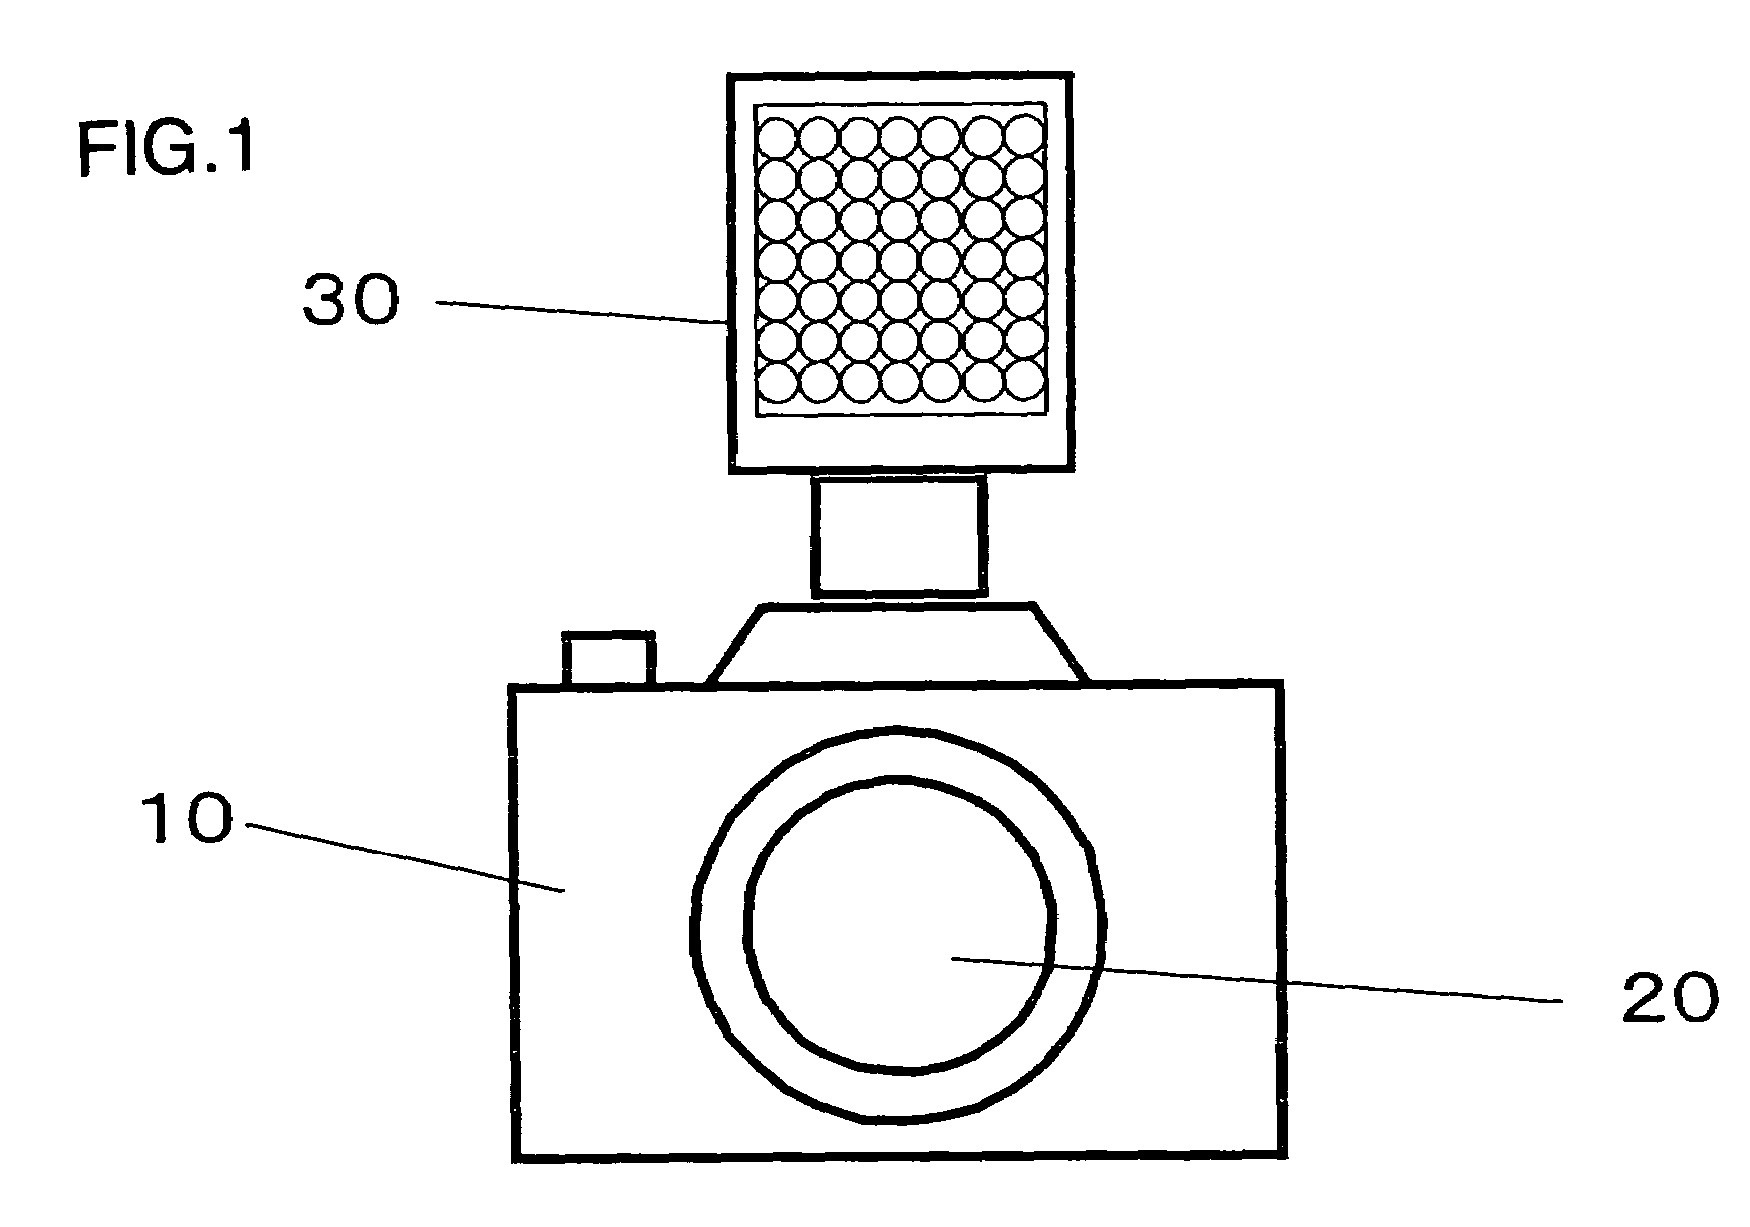 Illuminating device for photographing and camera